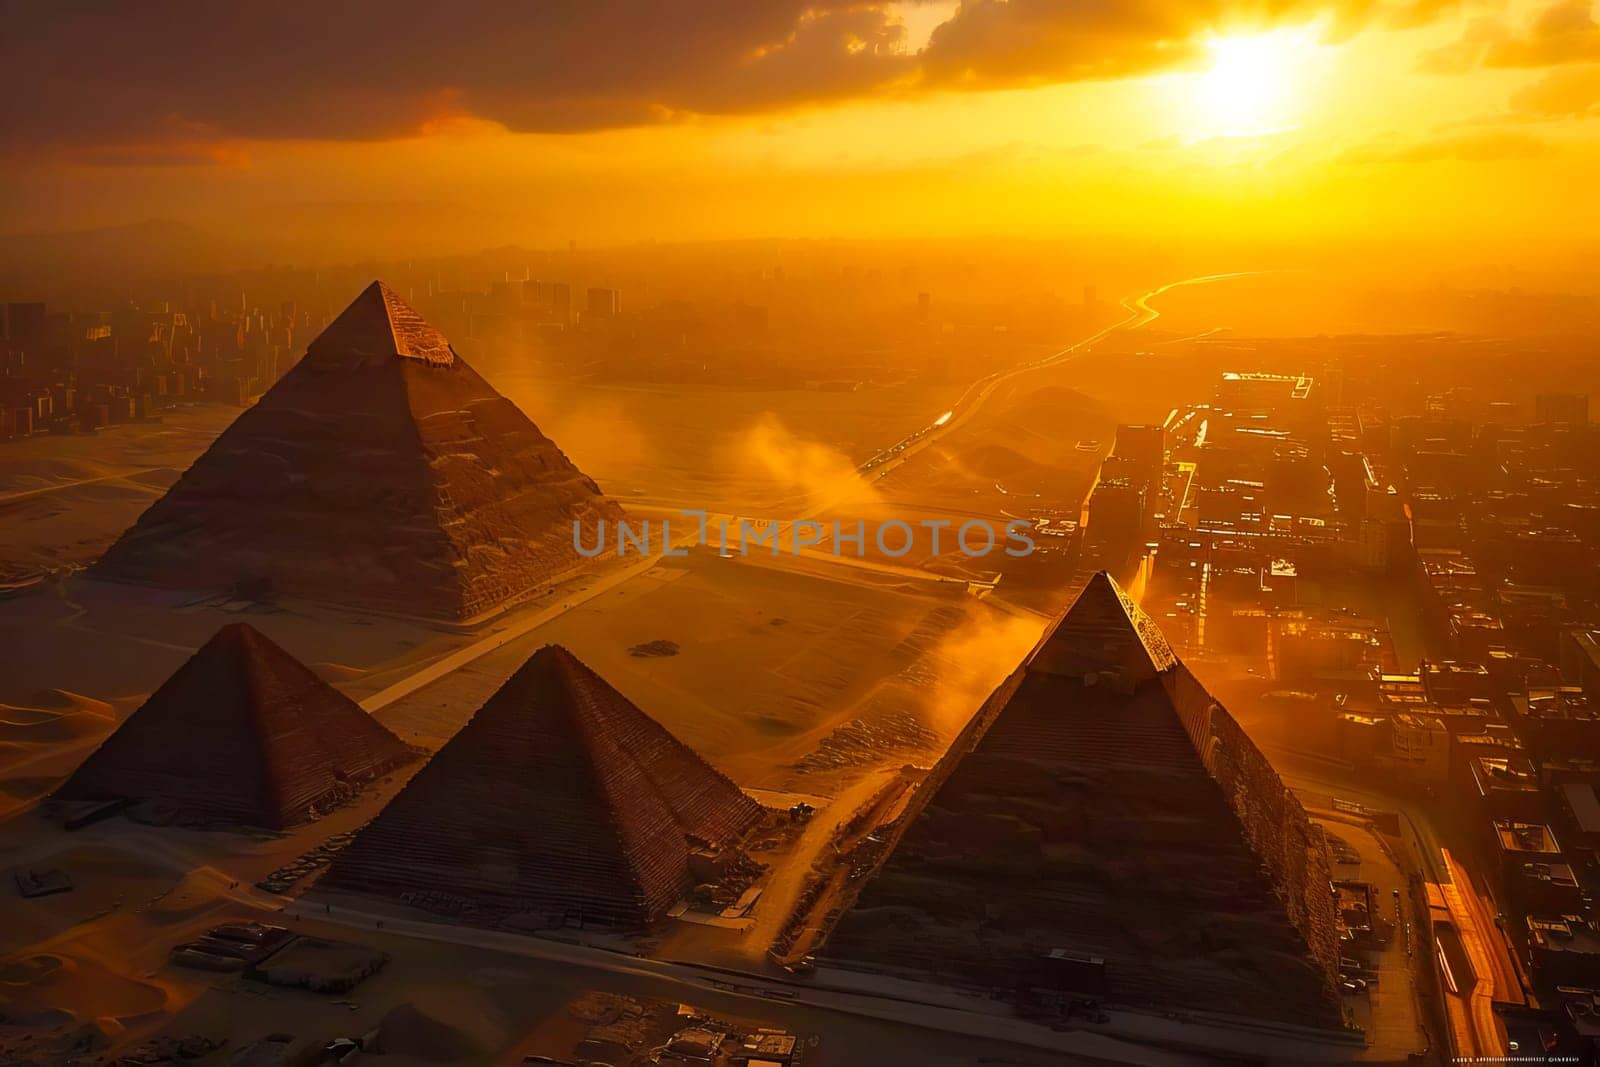 The iconic Pyramids of Giza captured from above during a picturesque sunset.